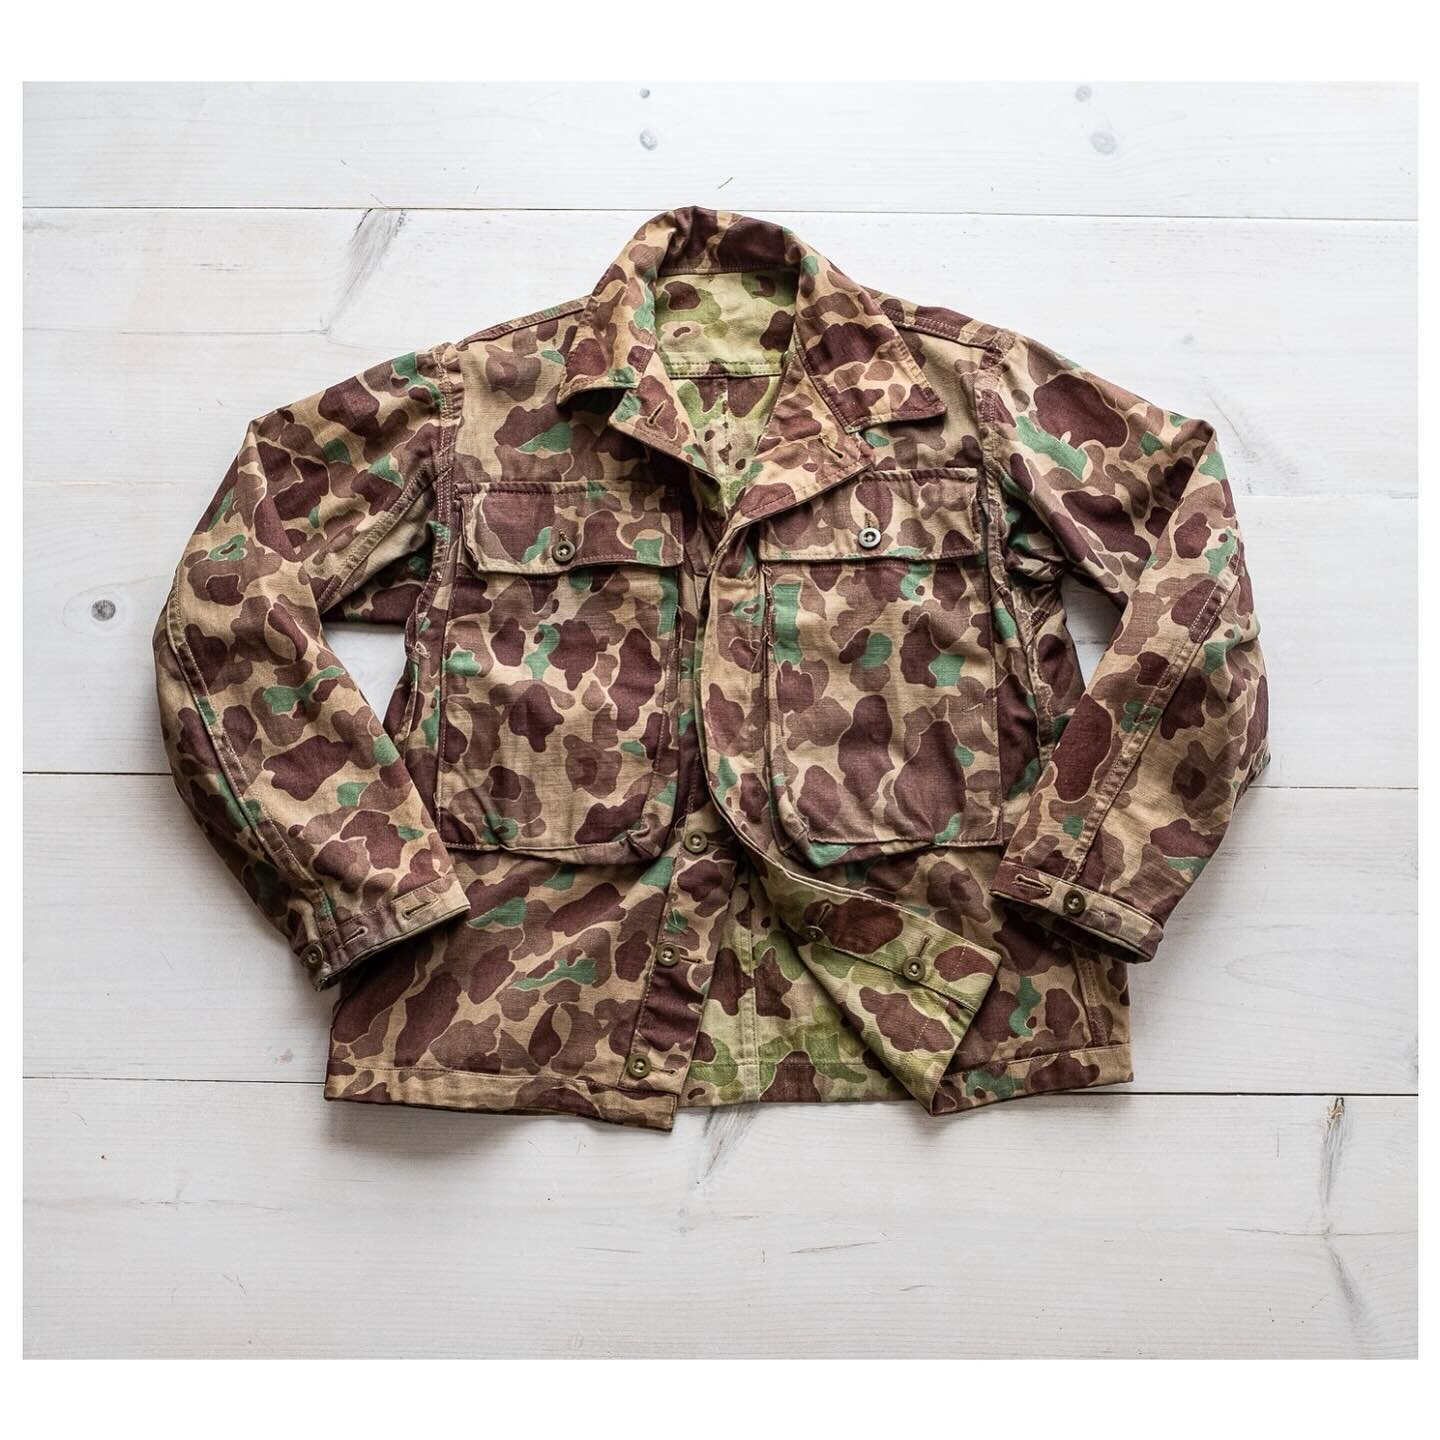 Archive Piece (Not For Sale). Ah what the hell, let&rsquo;s show another recent Archive acquisition. 

It should be a surprise to no one that experimental US military camo garments from the Second World War are not generally easy to find!

It is espe